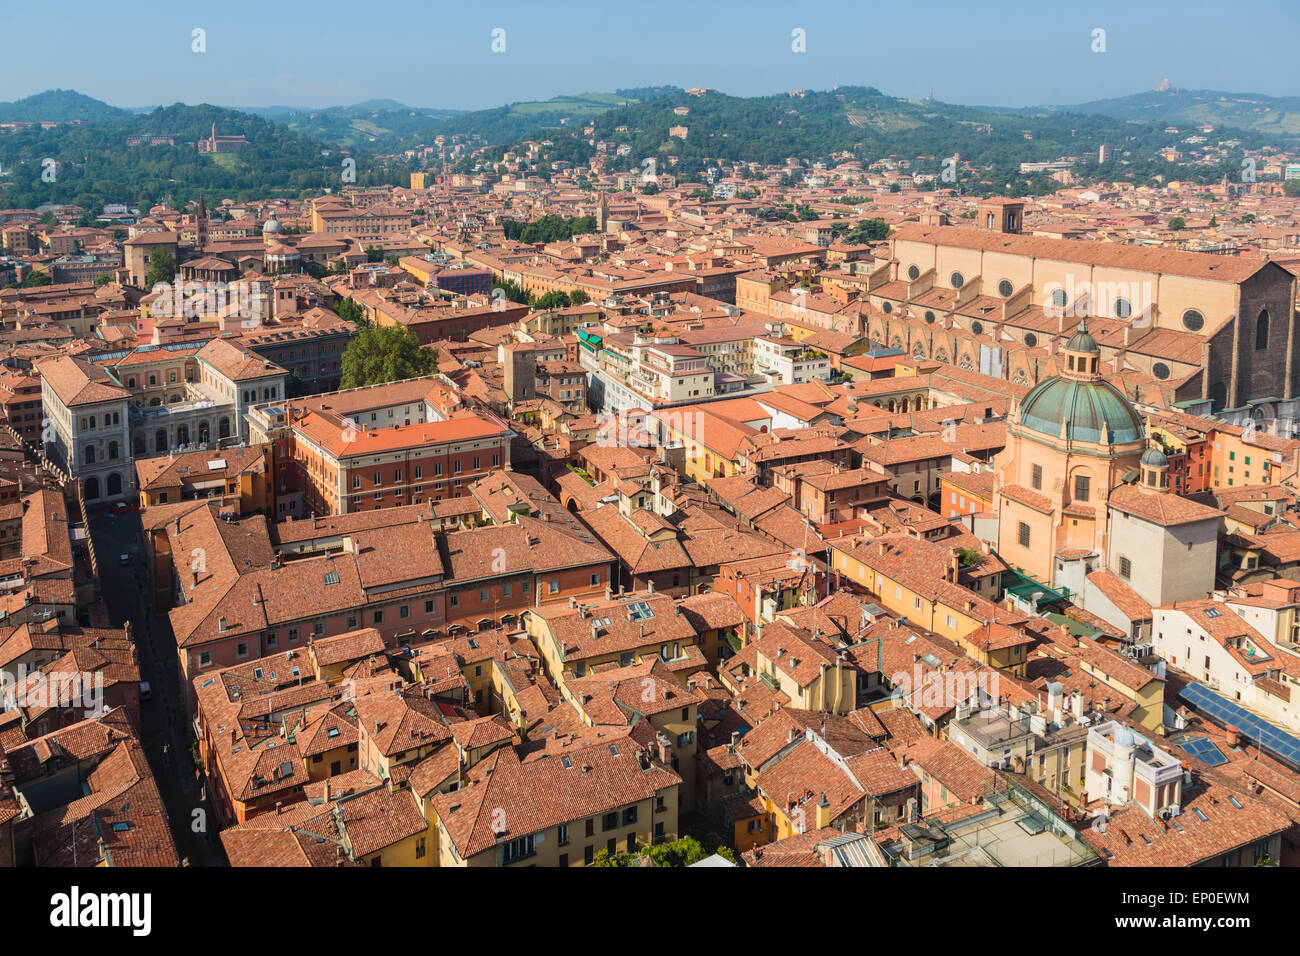 Bologna, Emilia-Romagna, Italy. Overall view of the historic centre of the city. Stock Photo